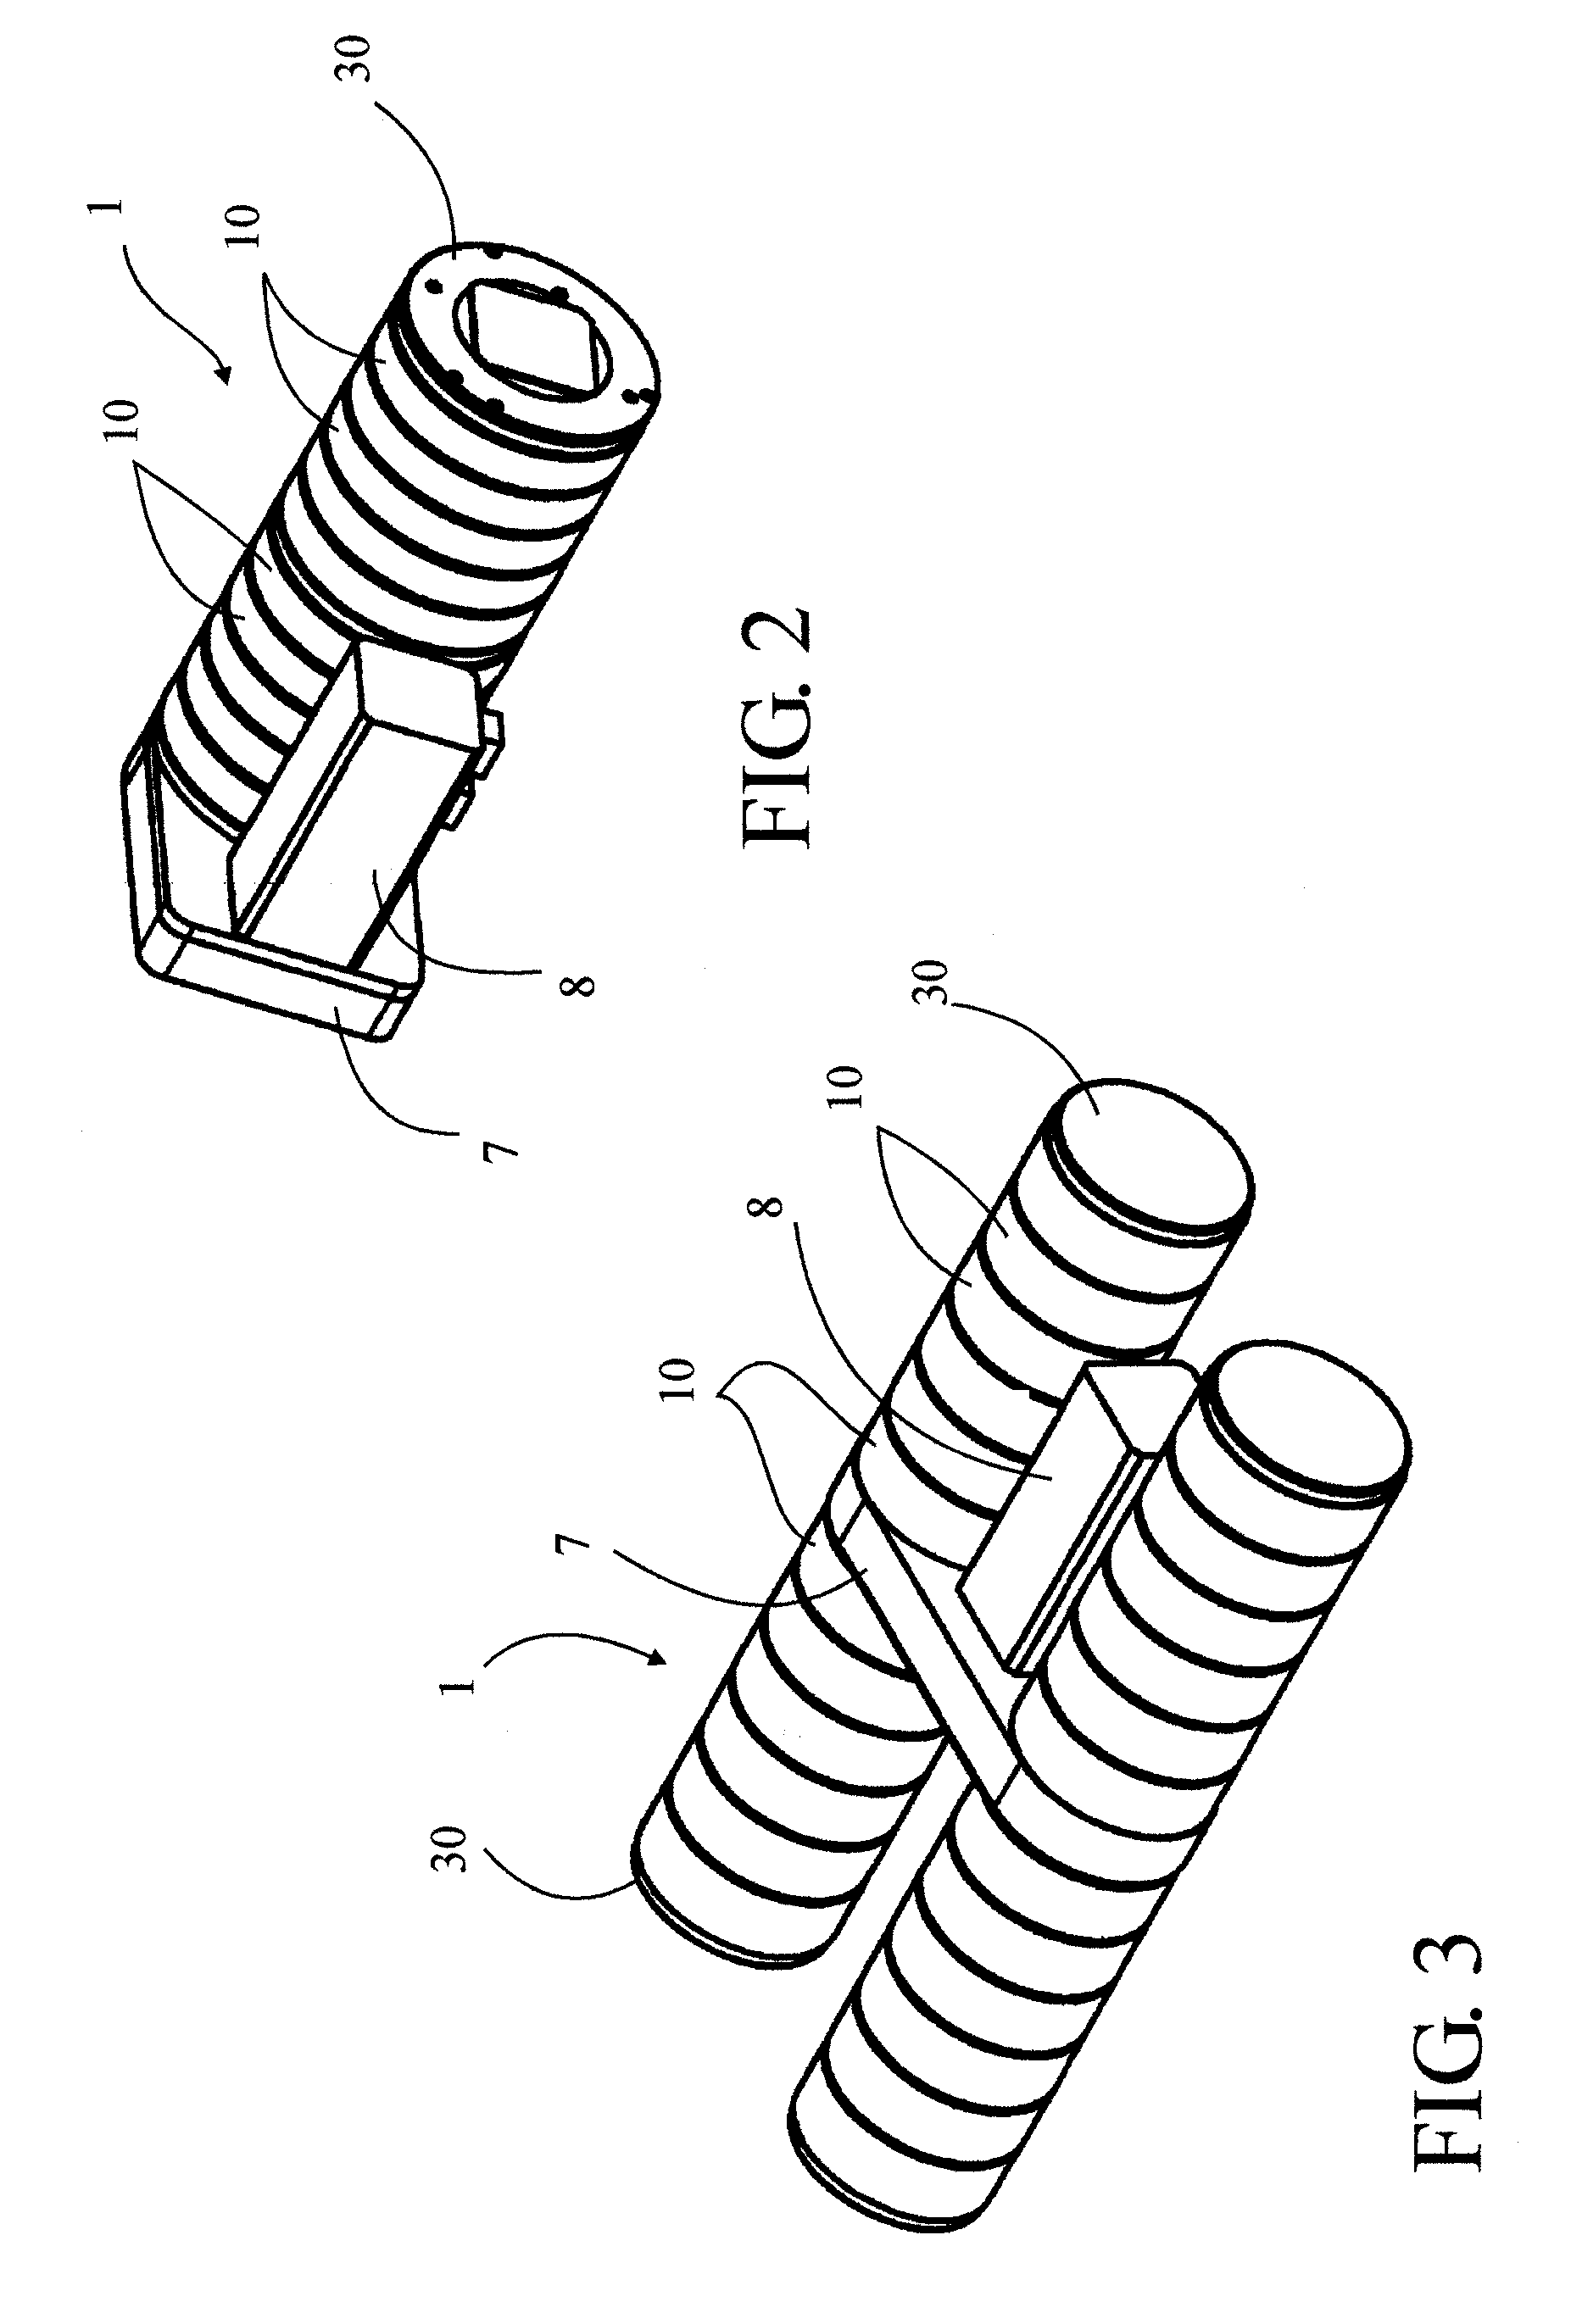 Magnetocaloric thermal generator having hot and cold circuits channeled between stacked thermal elements